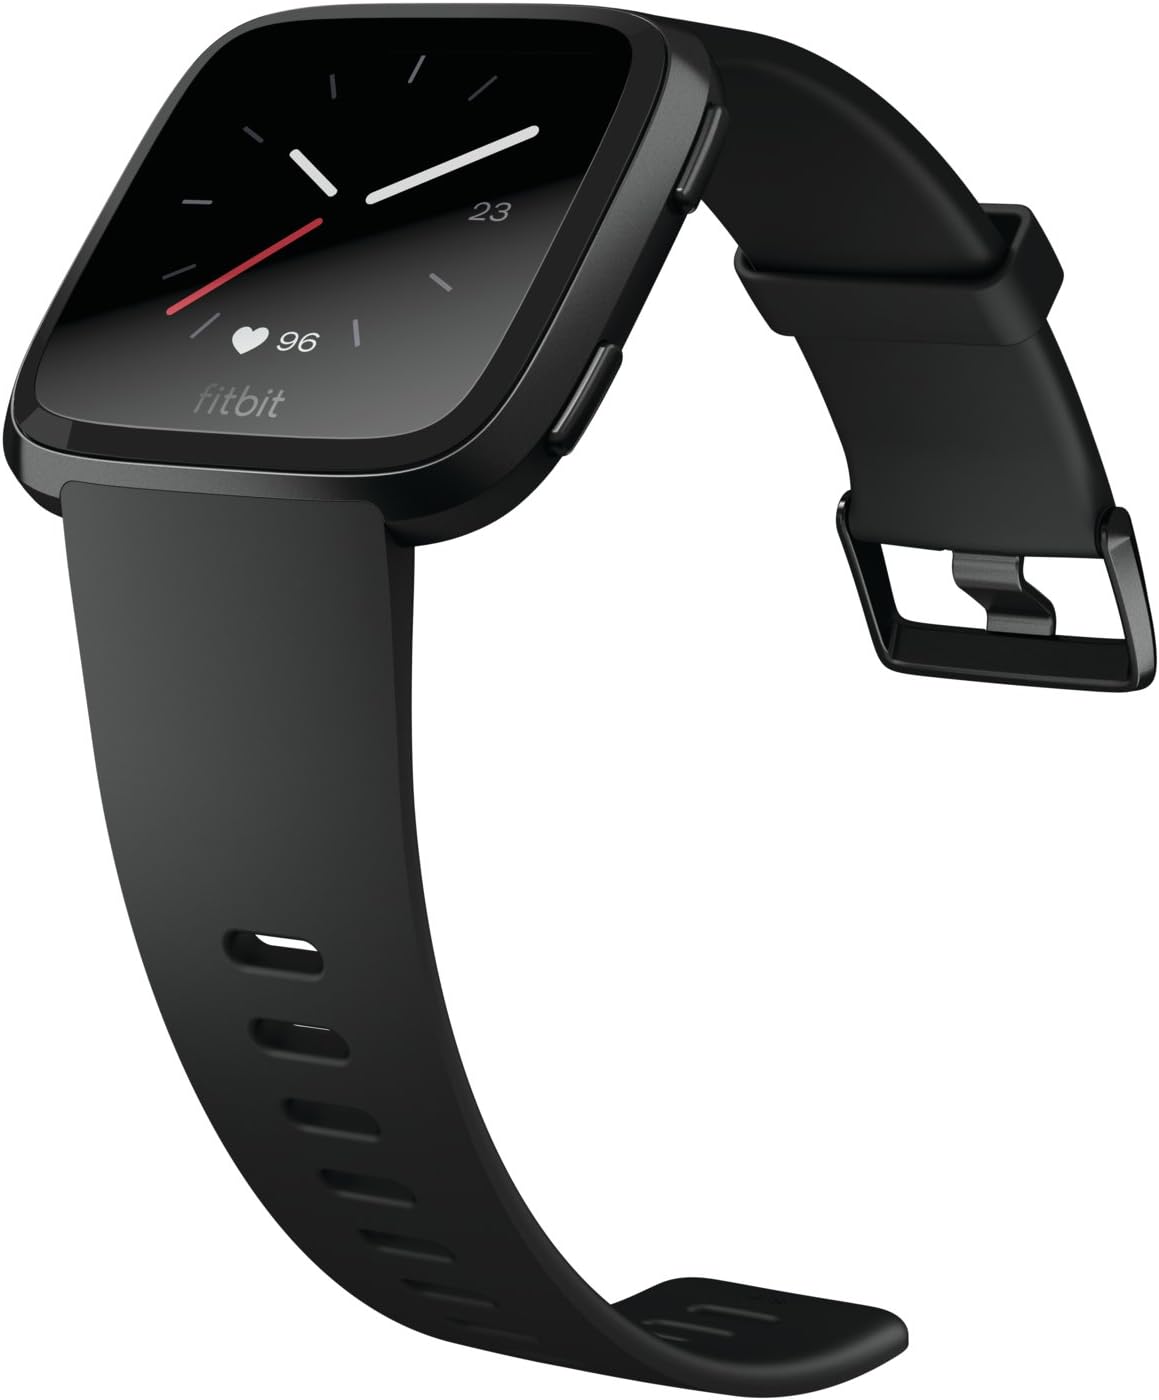 Fitbit Versa Smart Watch, Black/Black Aluminium, One Size (S & L Bands Included) - image 4 of 11